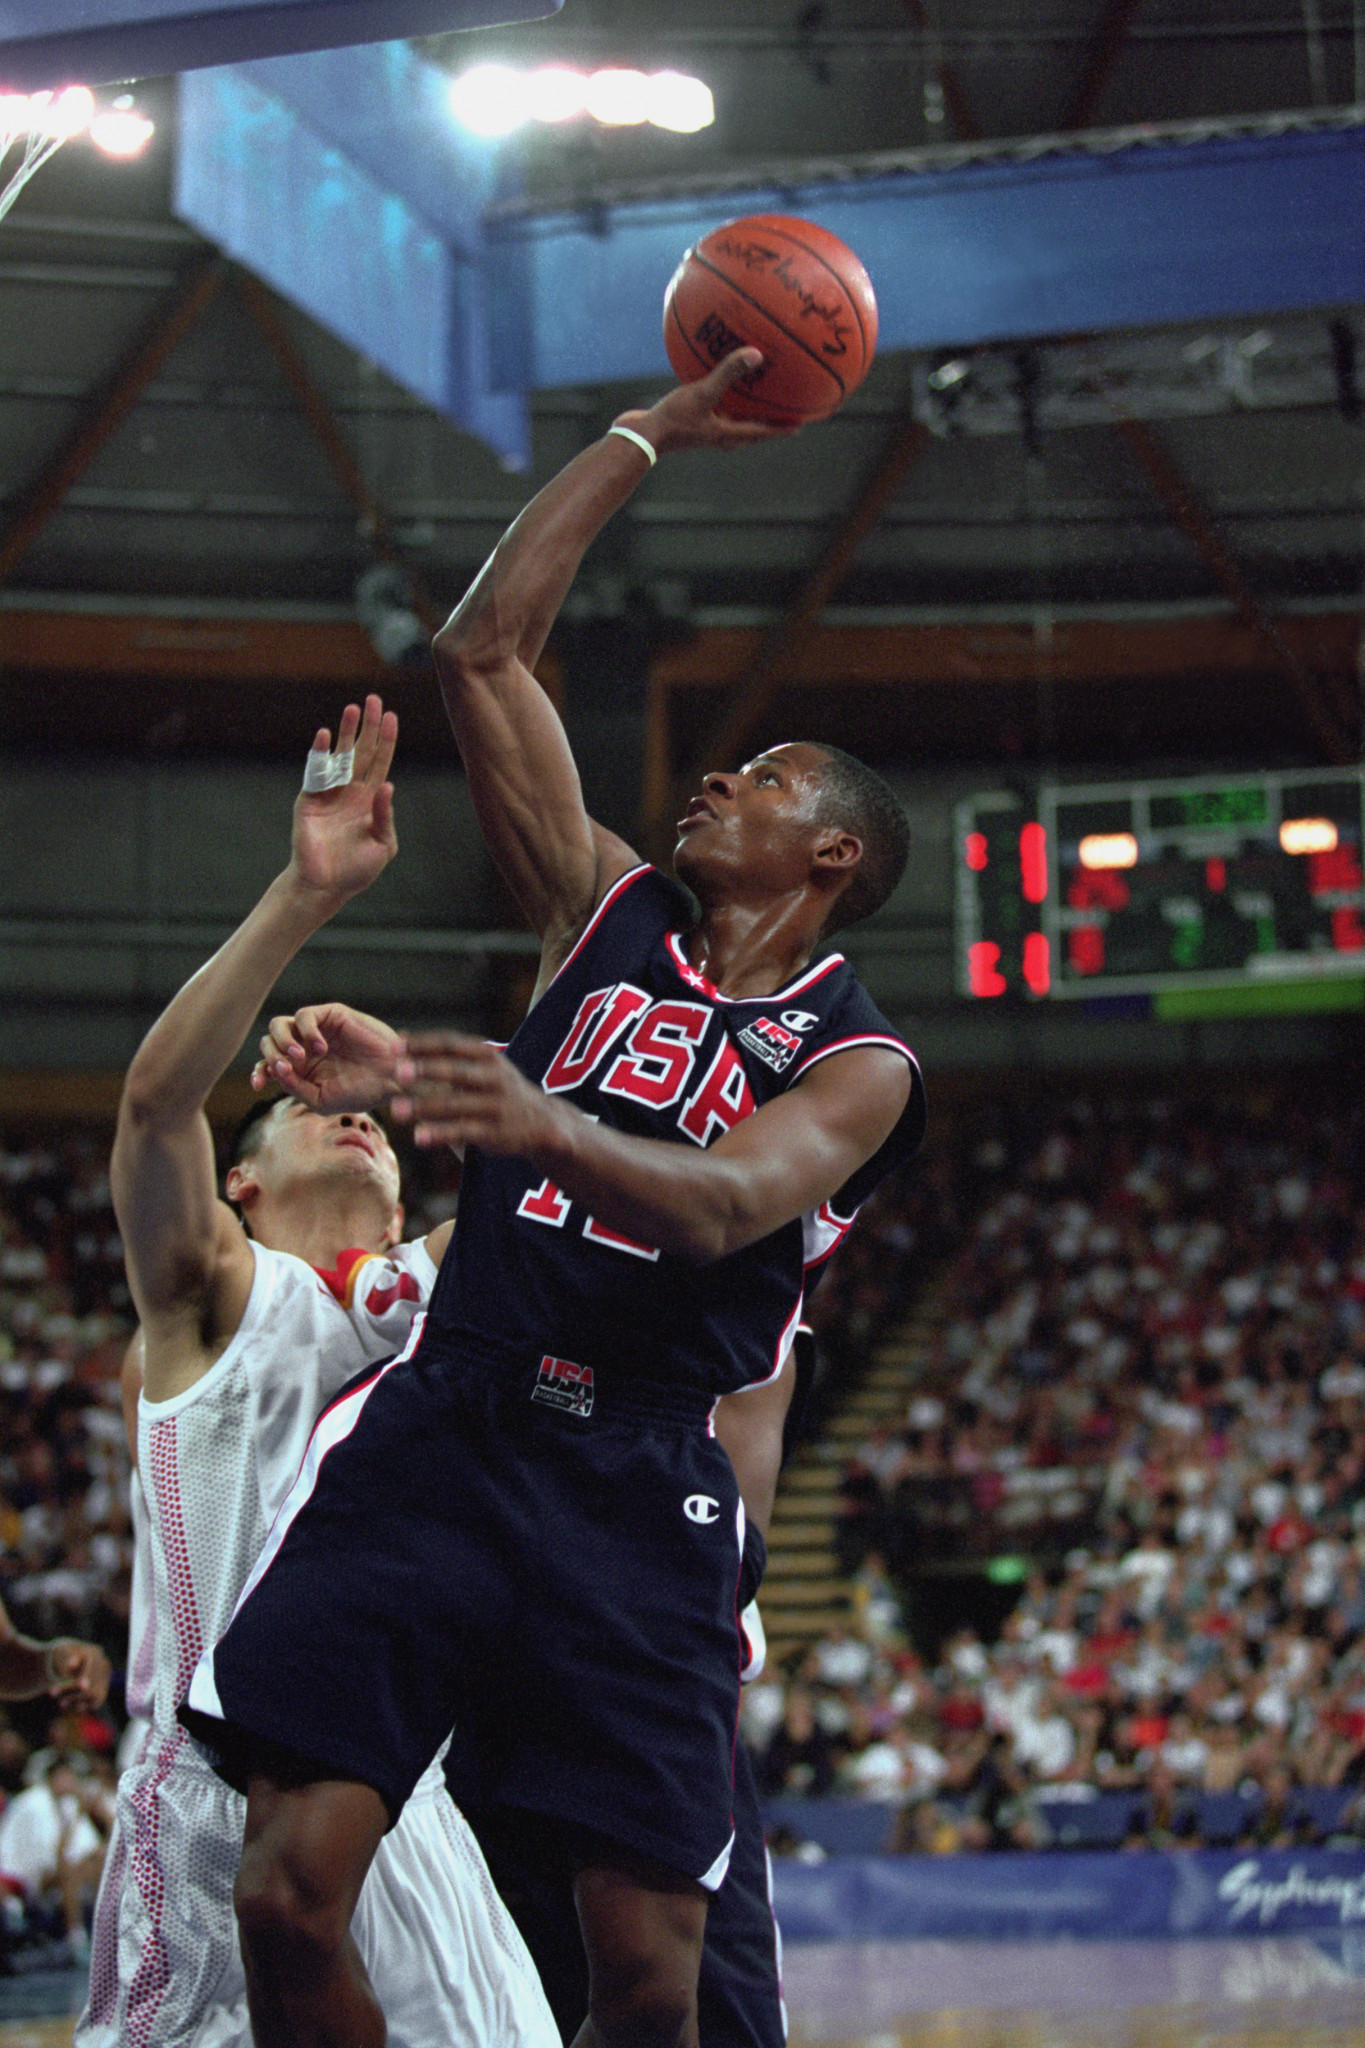 Sydney 2000 Olympic gold medallist Ray Allen has warned America's Olympic dominance in basketball could end at LA28 ©Getty Images